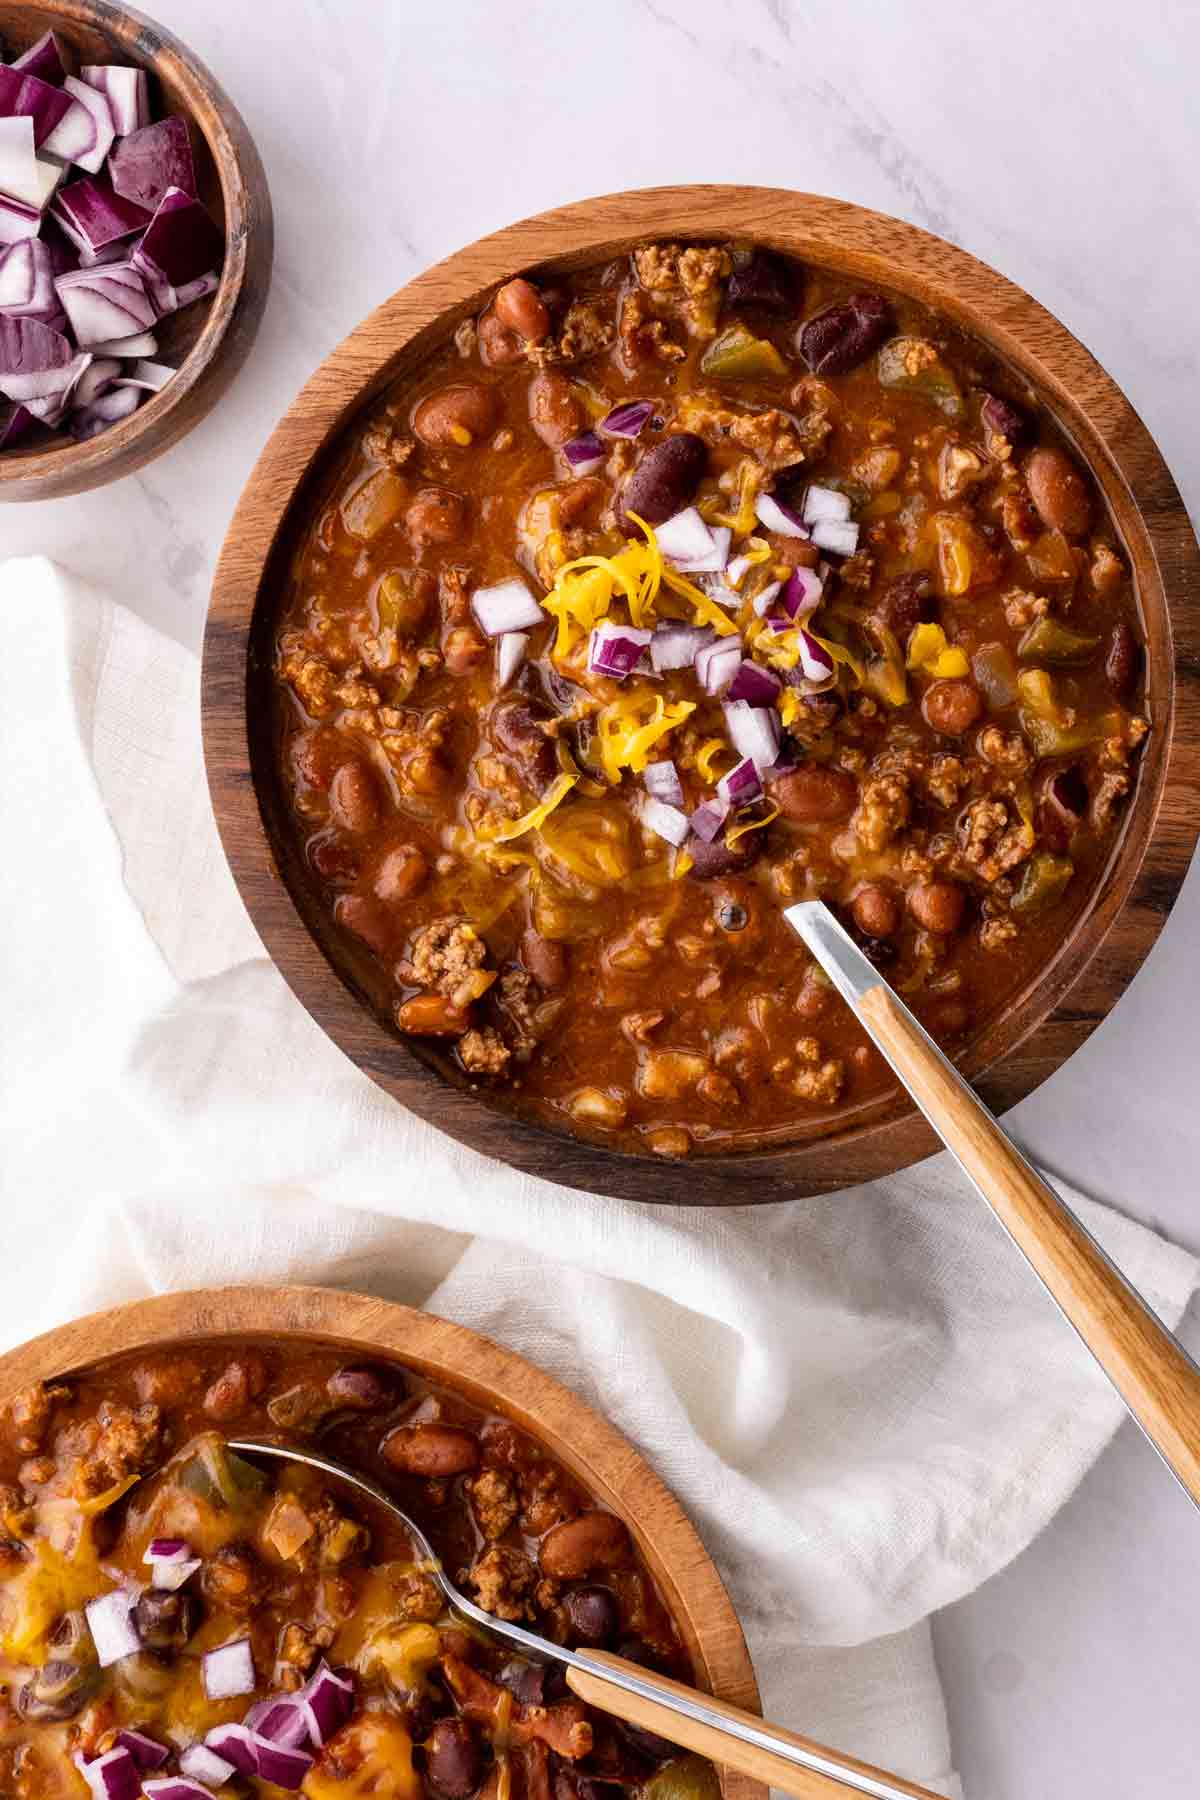 Chili with Beans, Peppers and Celery